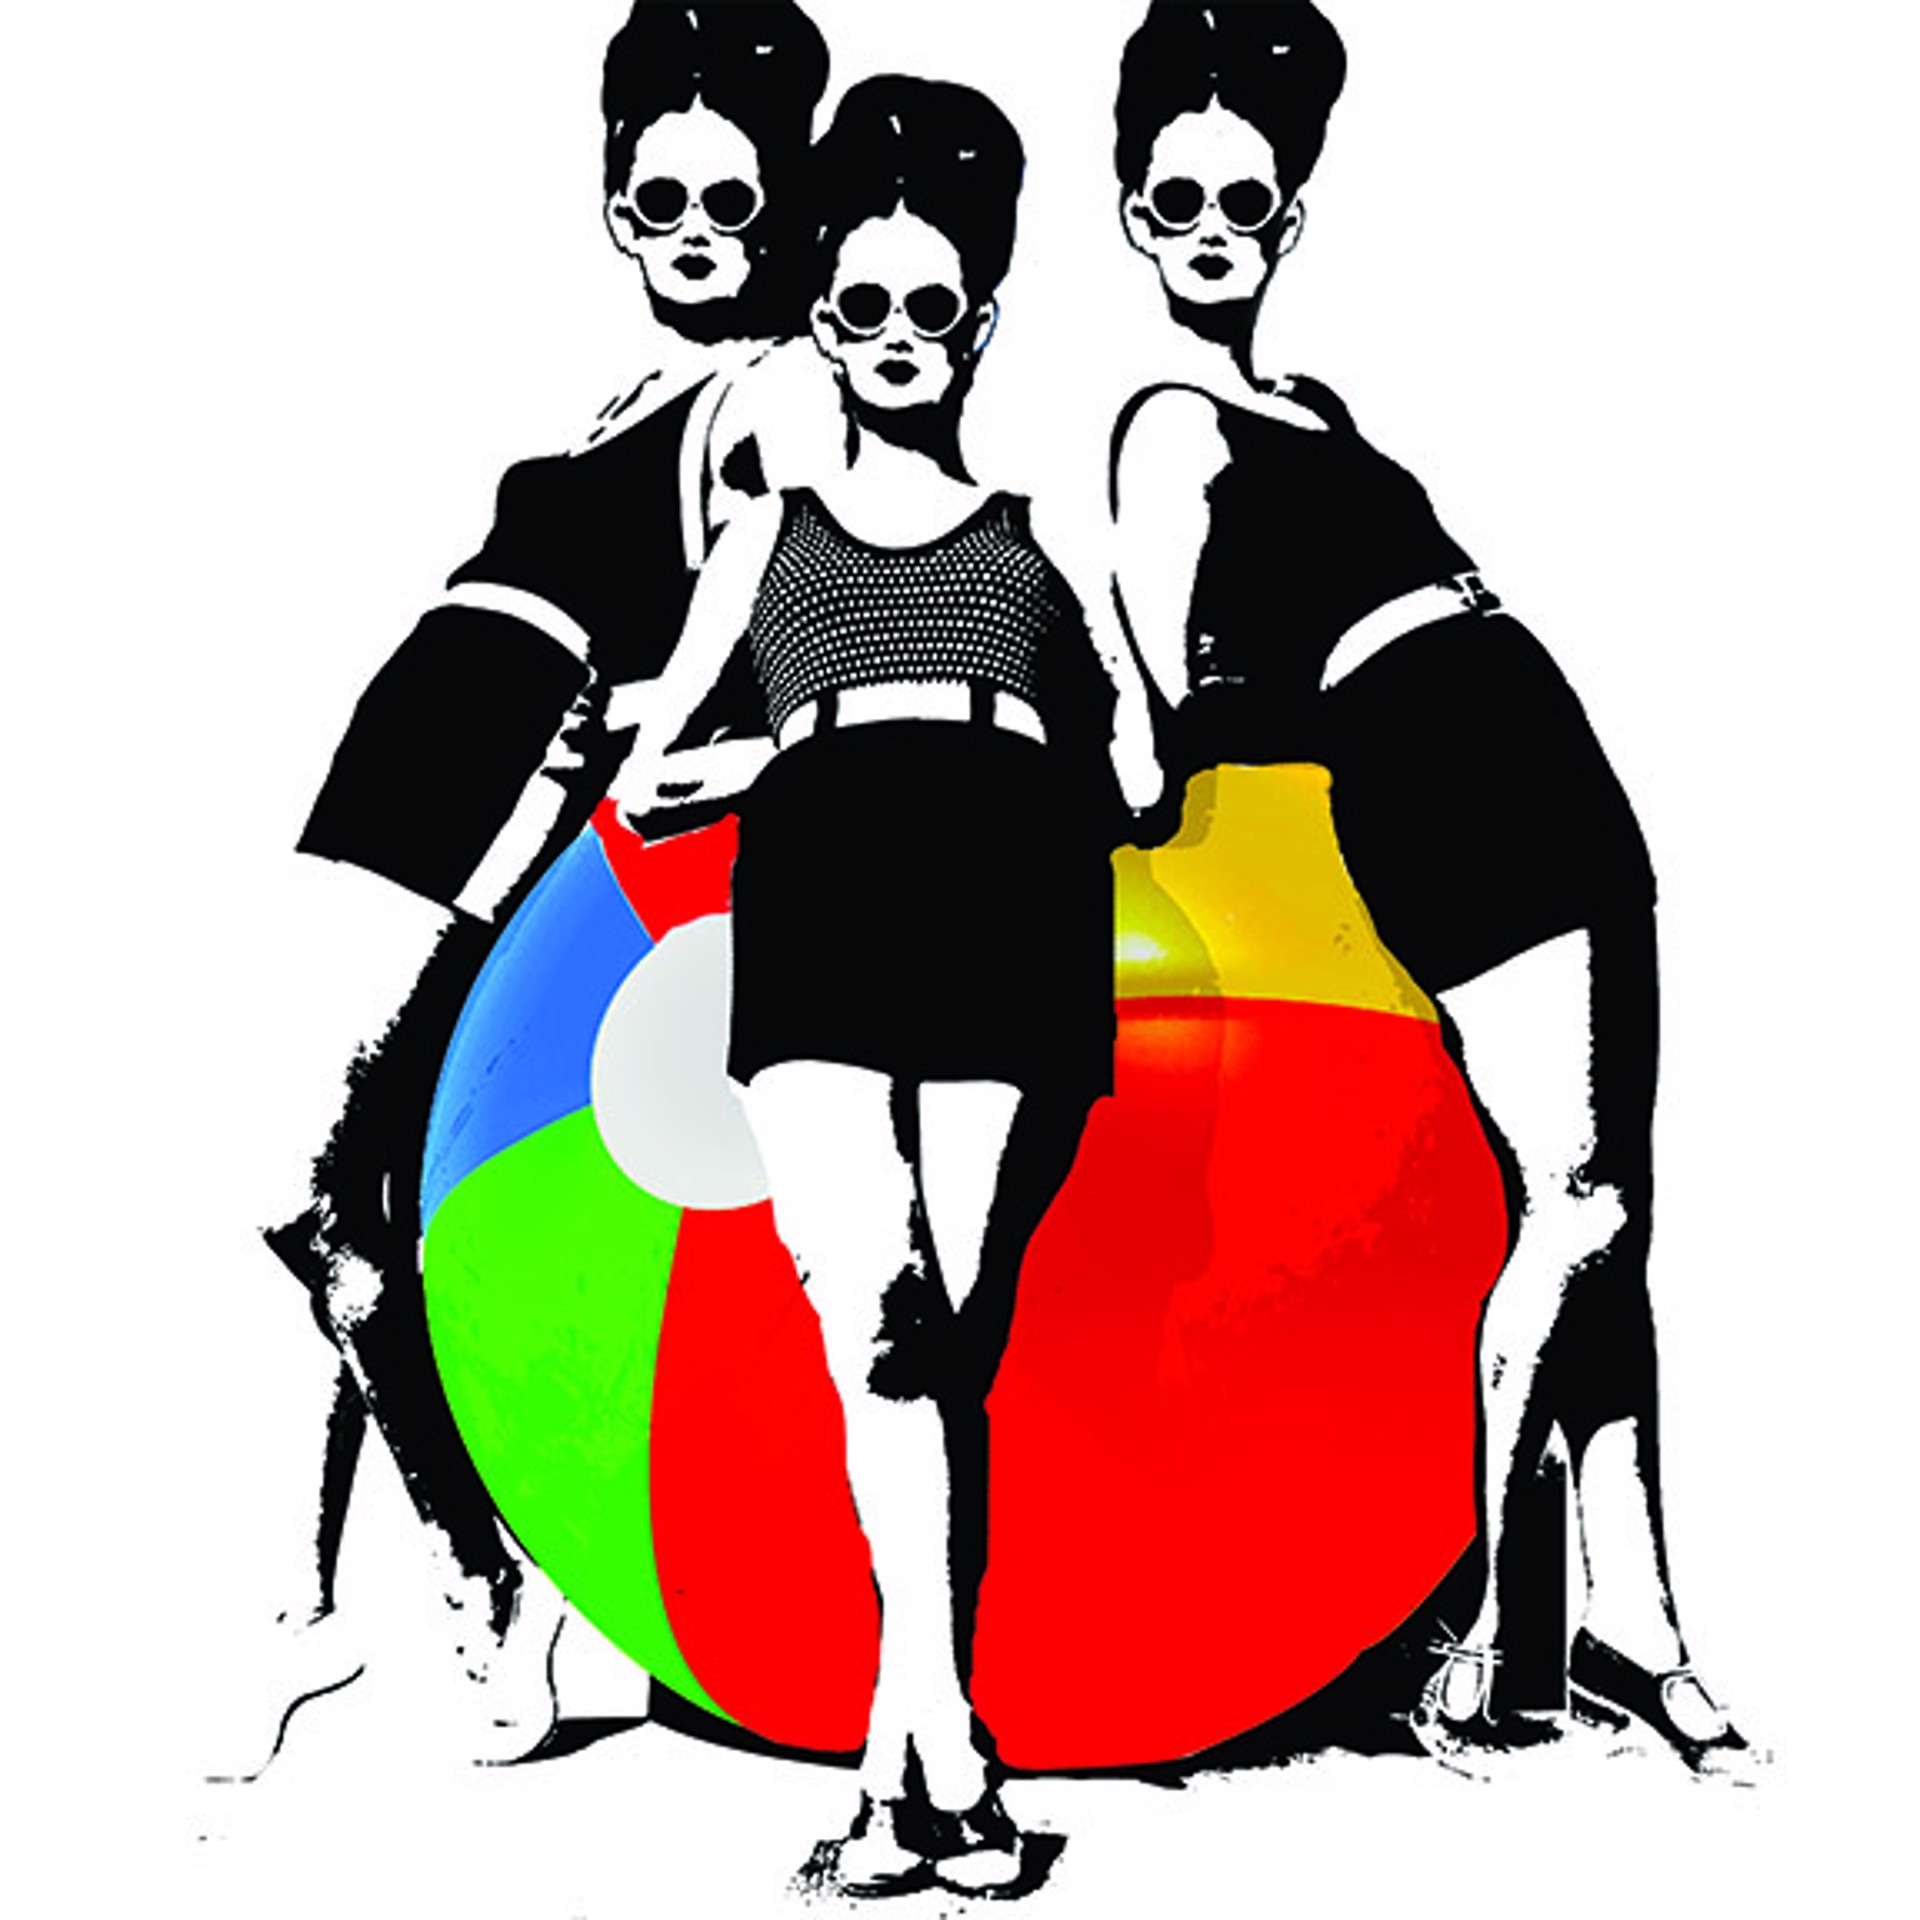 Beach Ball Girls* by Holly Manneck